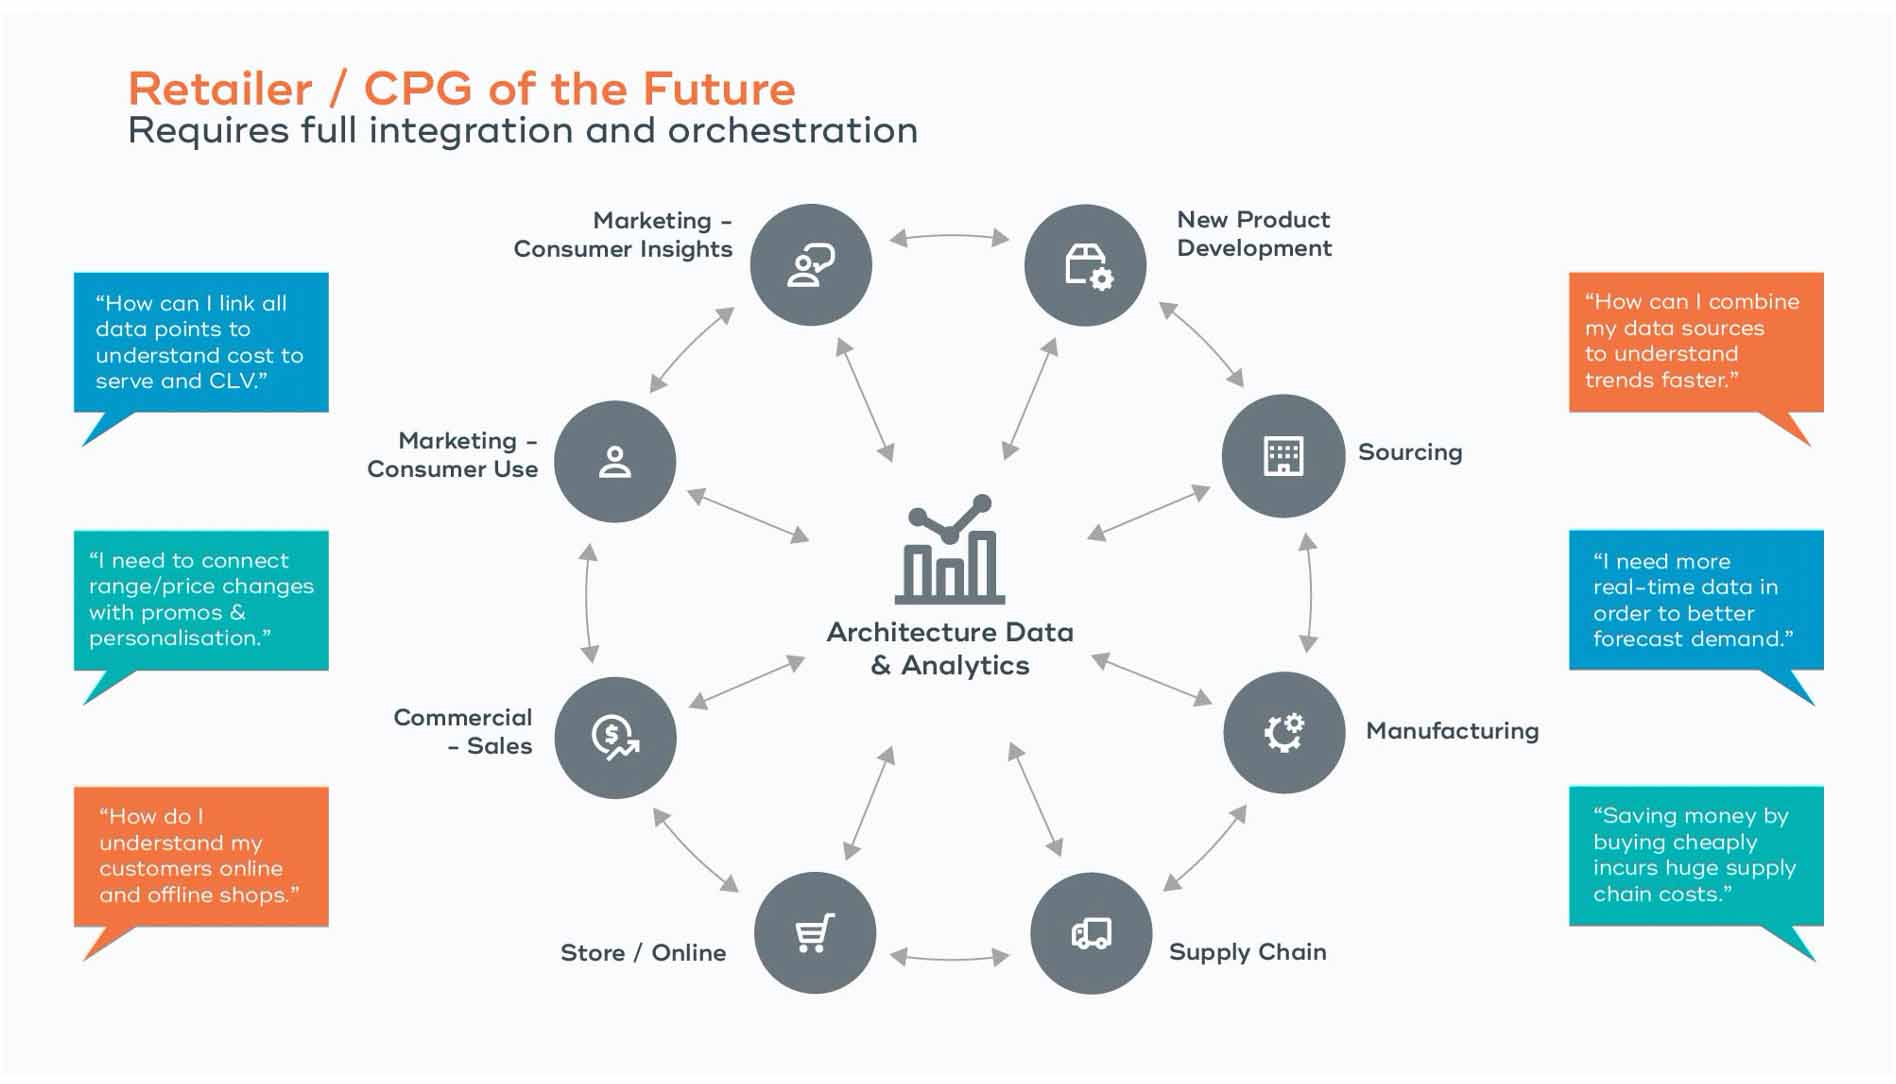 Figure of retailers and CPG of future